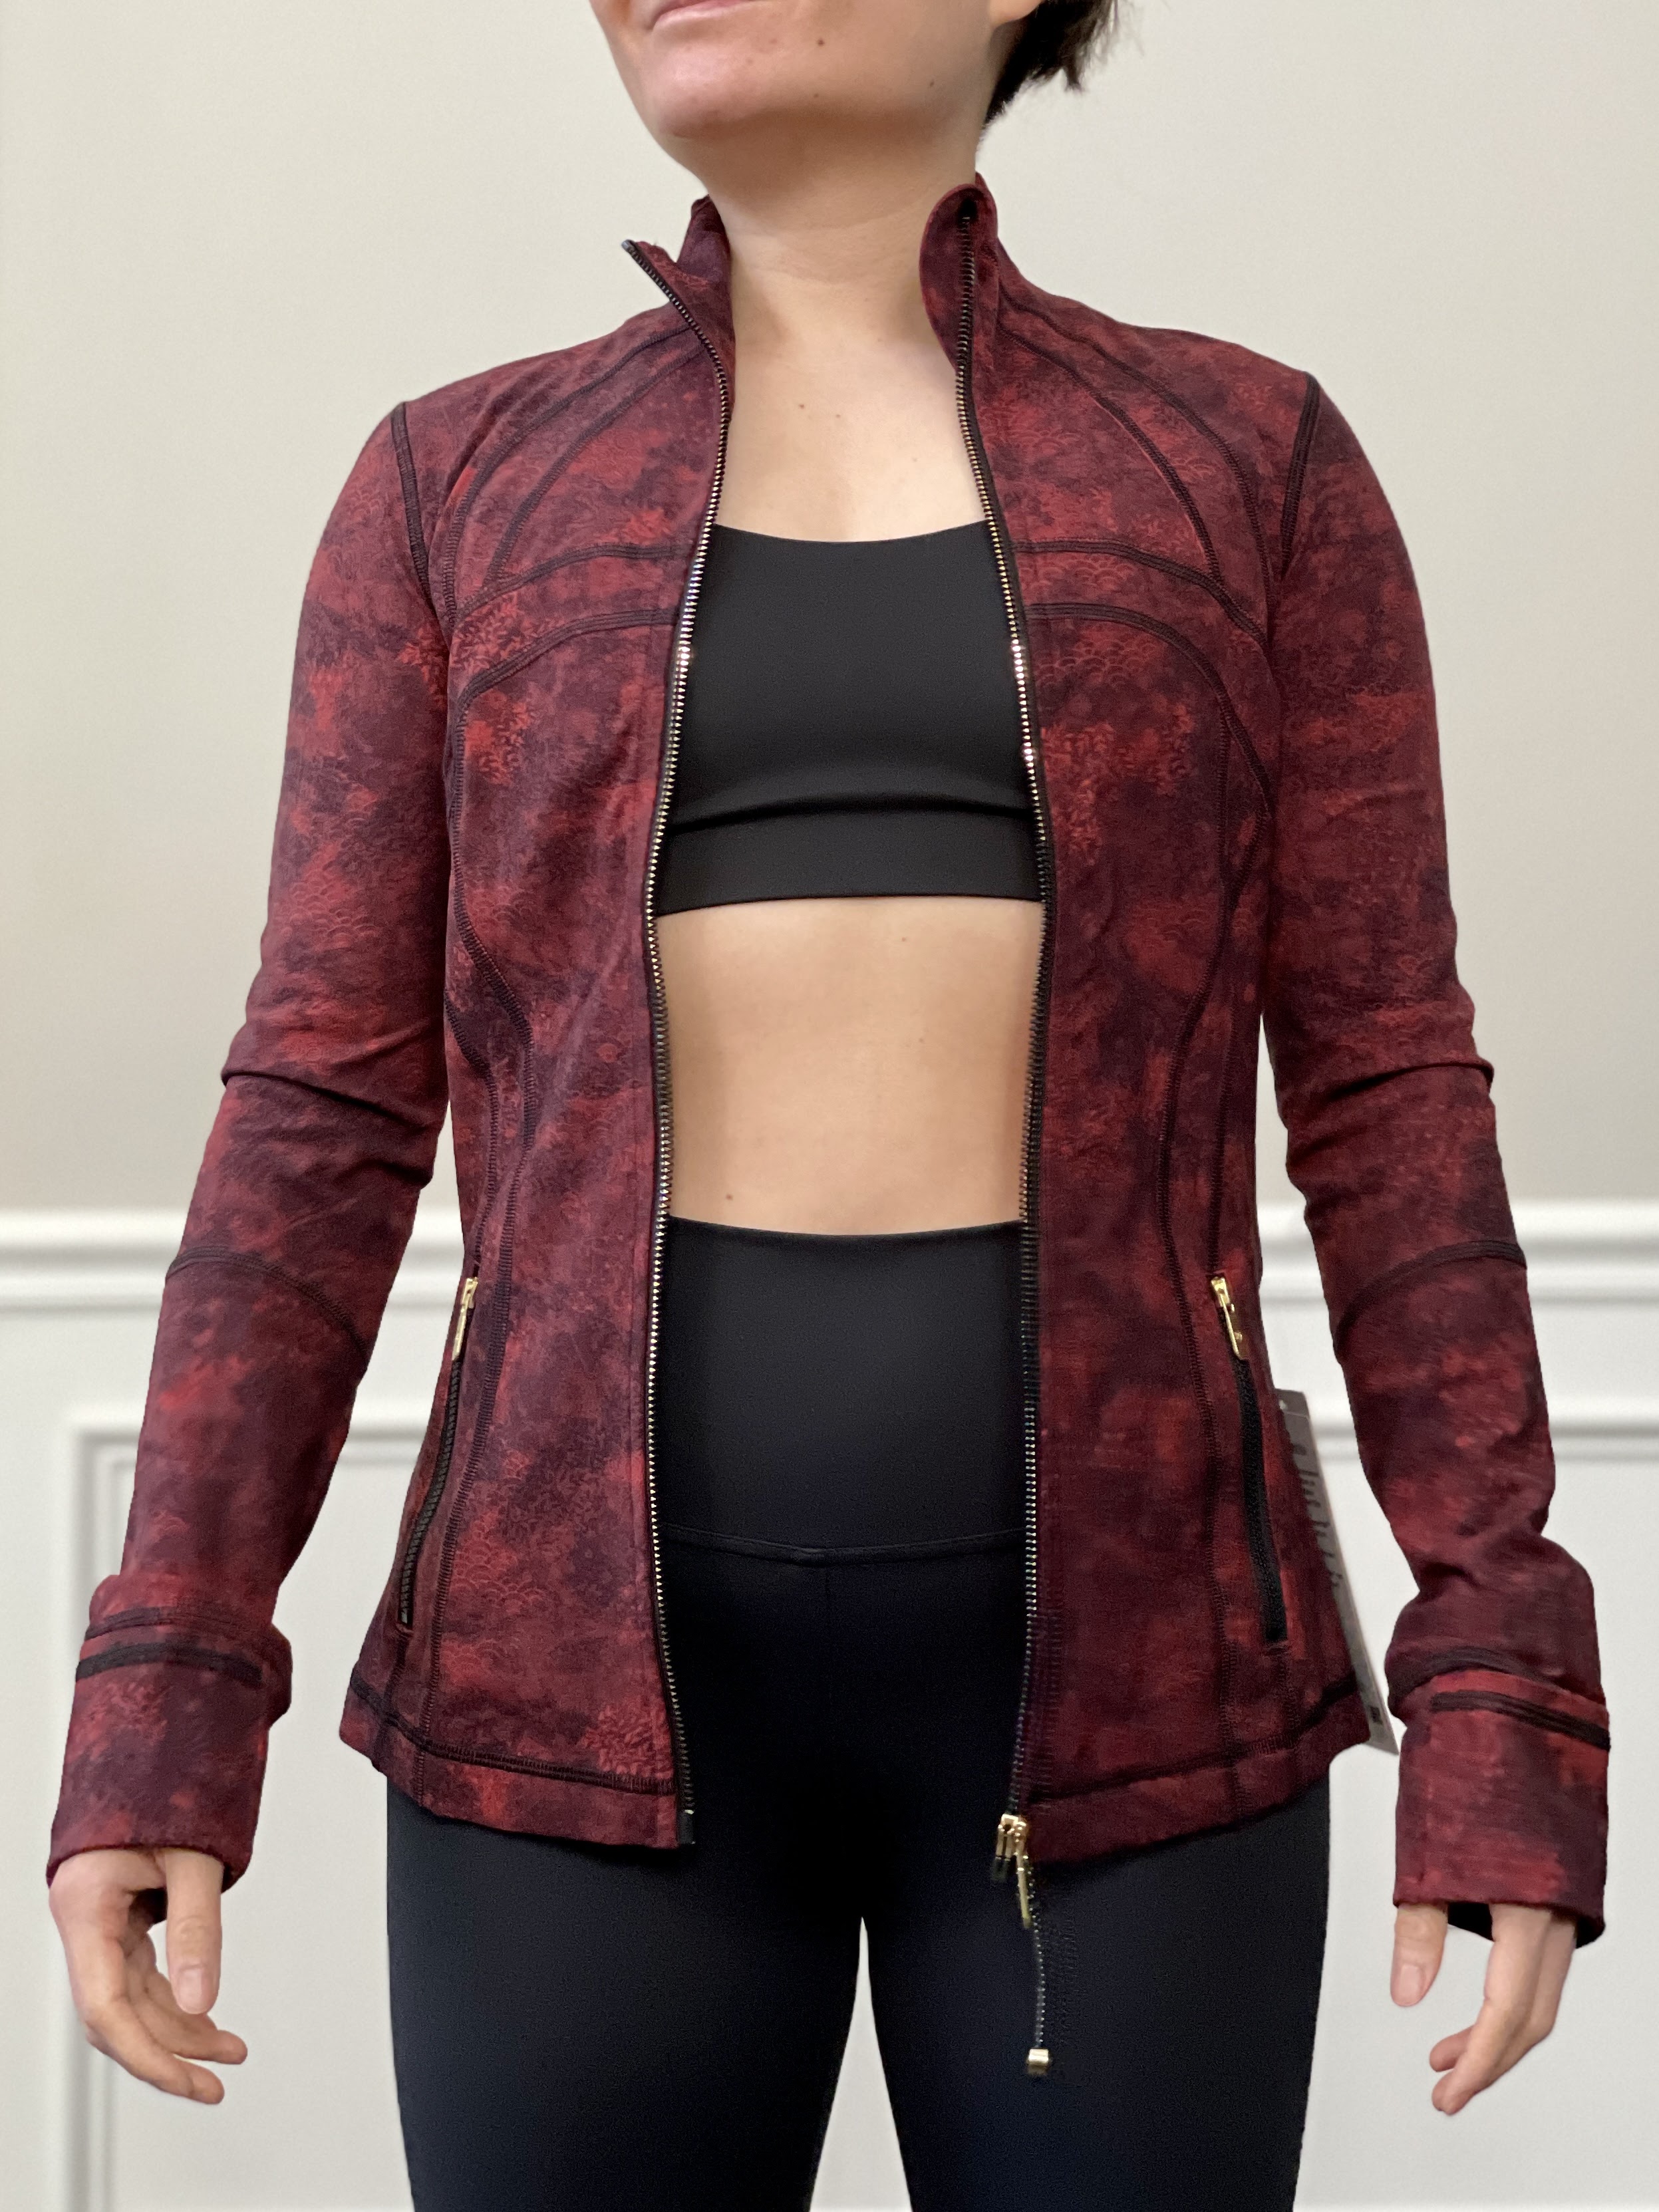 Fit Review Friday! Lunar New Year Define Jacket and Everywhere Belt Bag